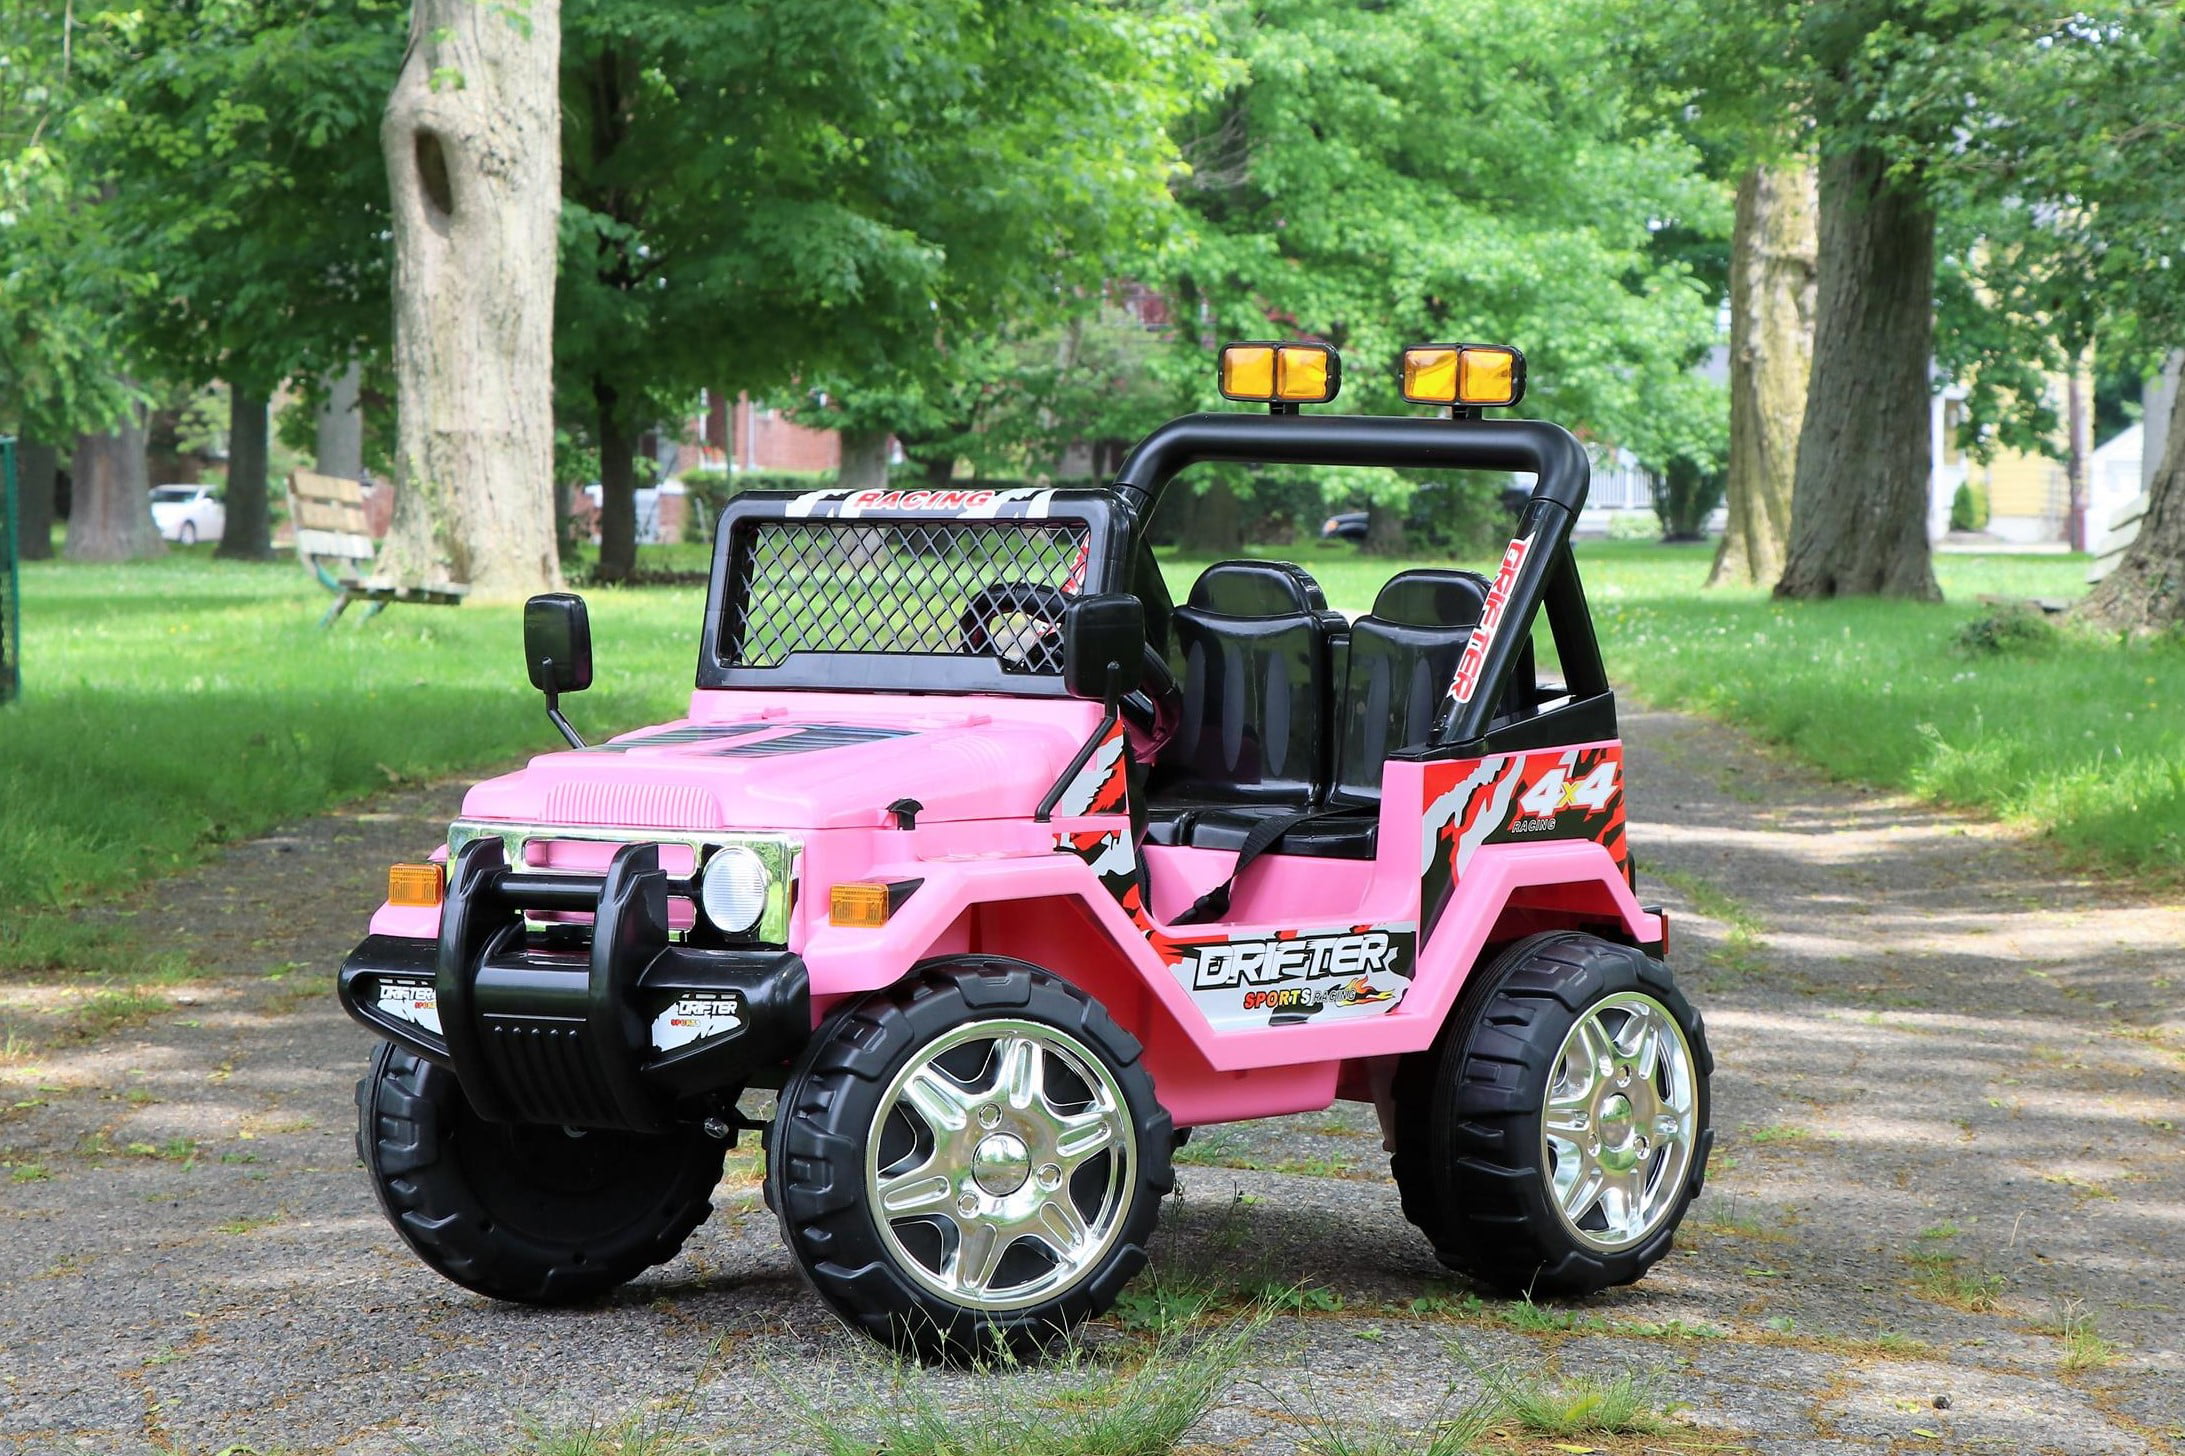 First Drive Jeep Truck - 12v Dual Motor Kids Electric Ride-On Car with Remote Control, MP3 Playback, Aux Cord, Premium Wheels - Pink